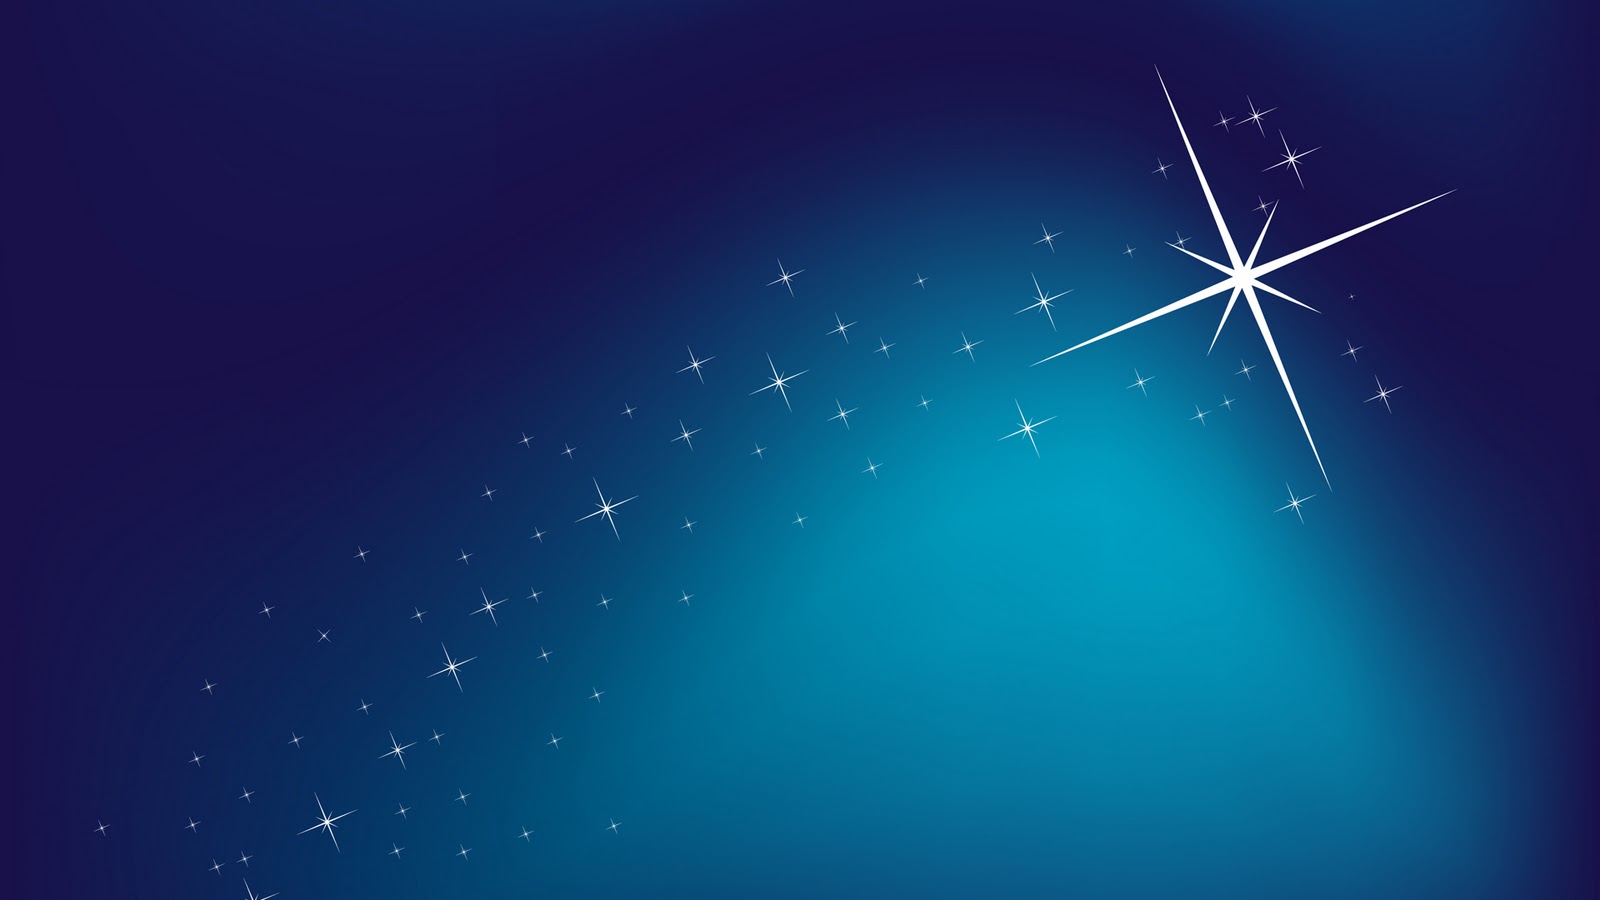 Gallery For Gt Christmas Star Background